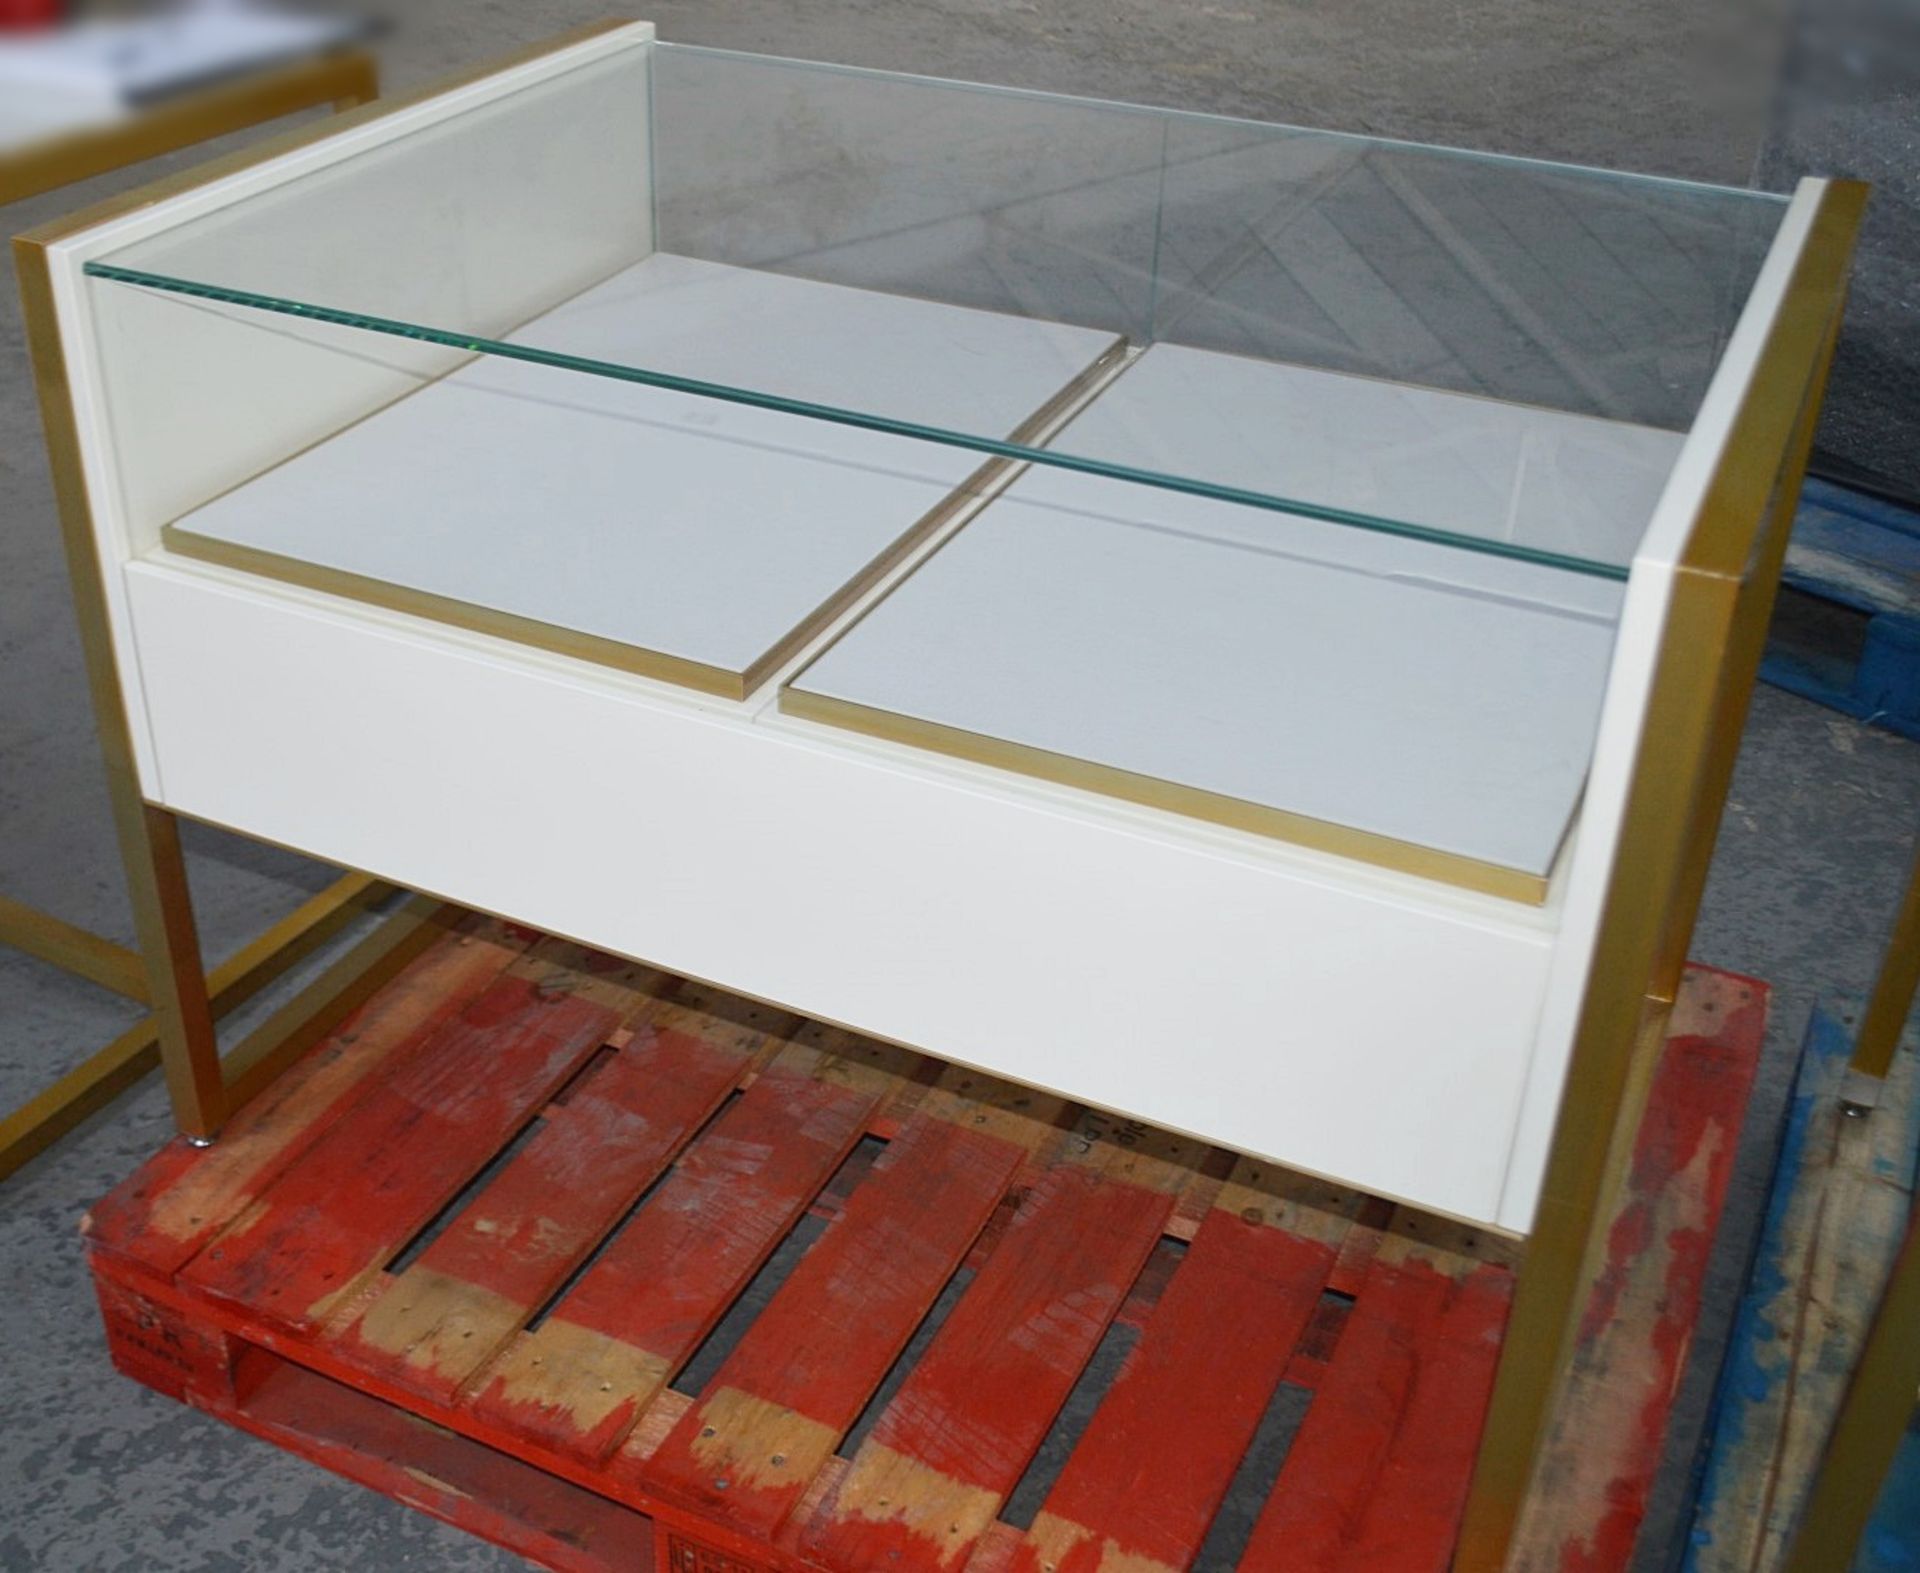 1 x Freestanding Jewellery Display Cabinet Featuring 2 x Pull-Out Trays With Leather Inserts - Image 2 of 7